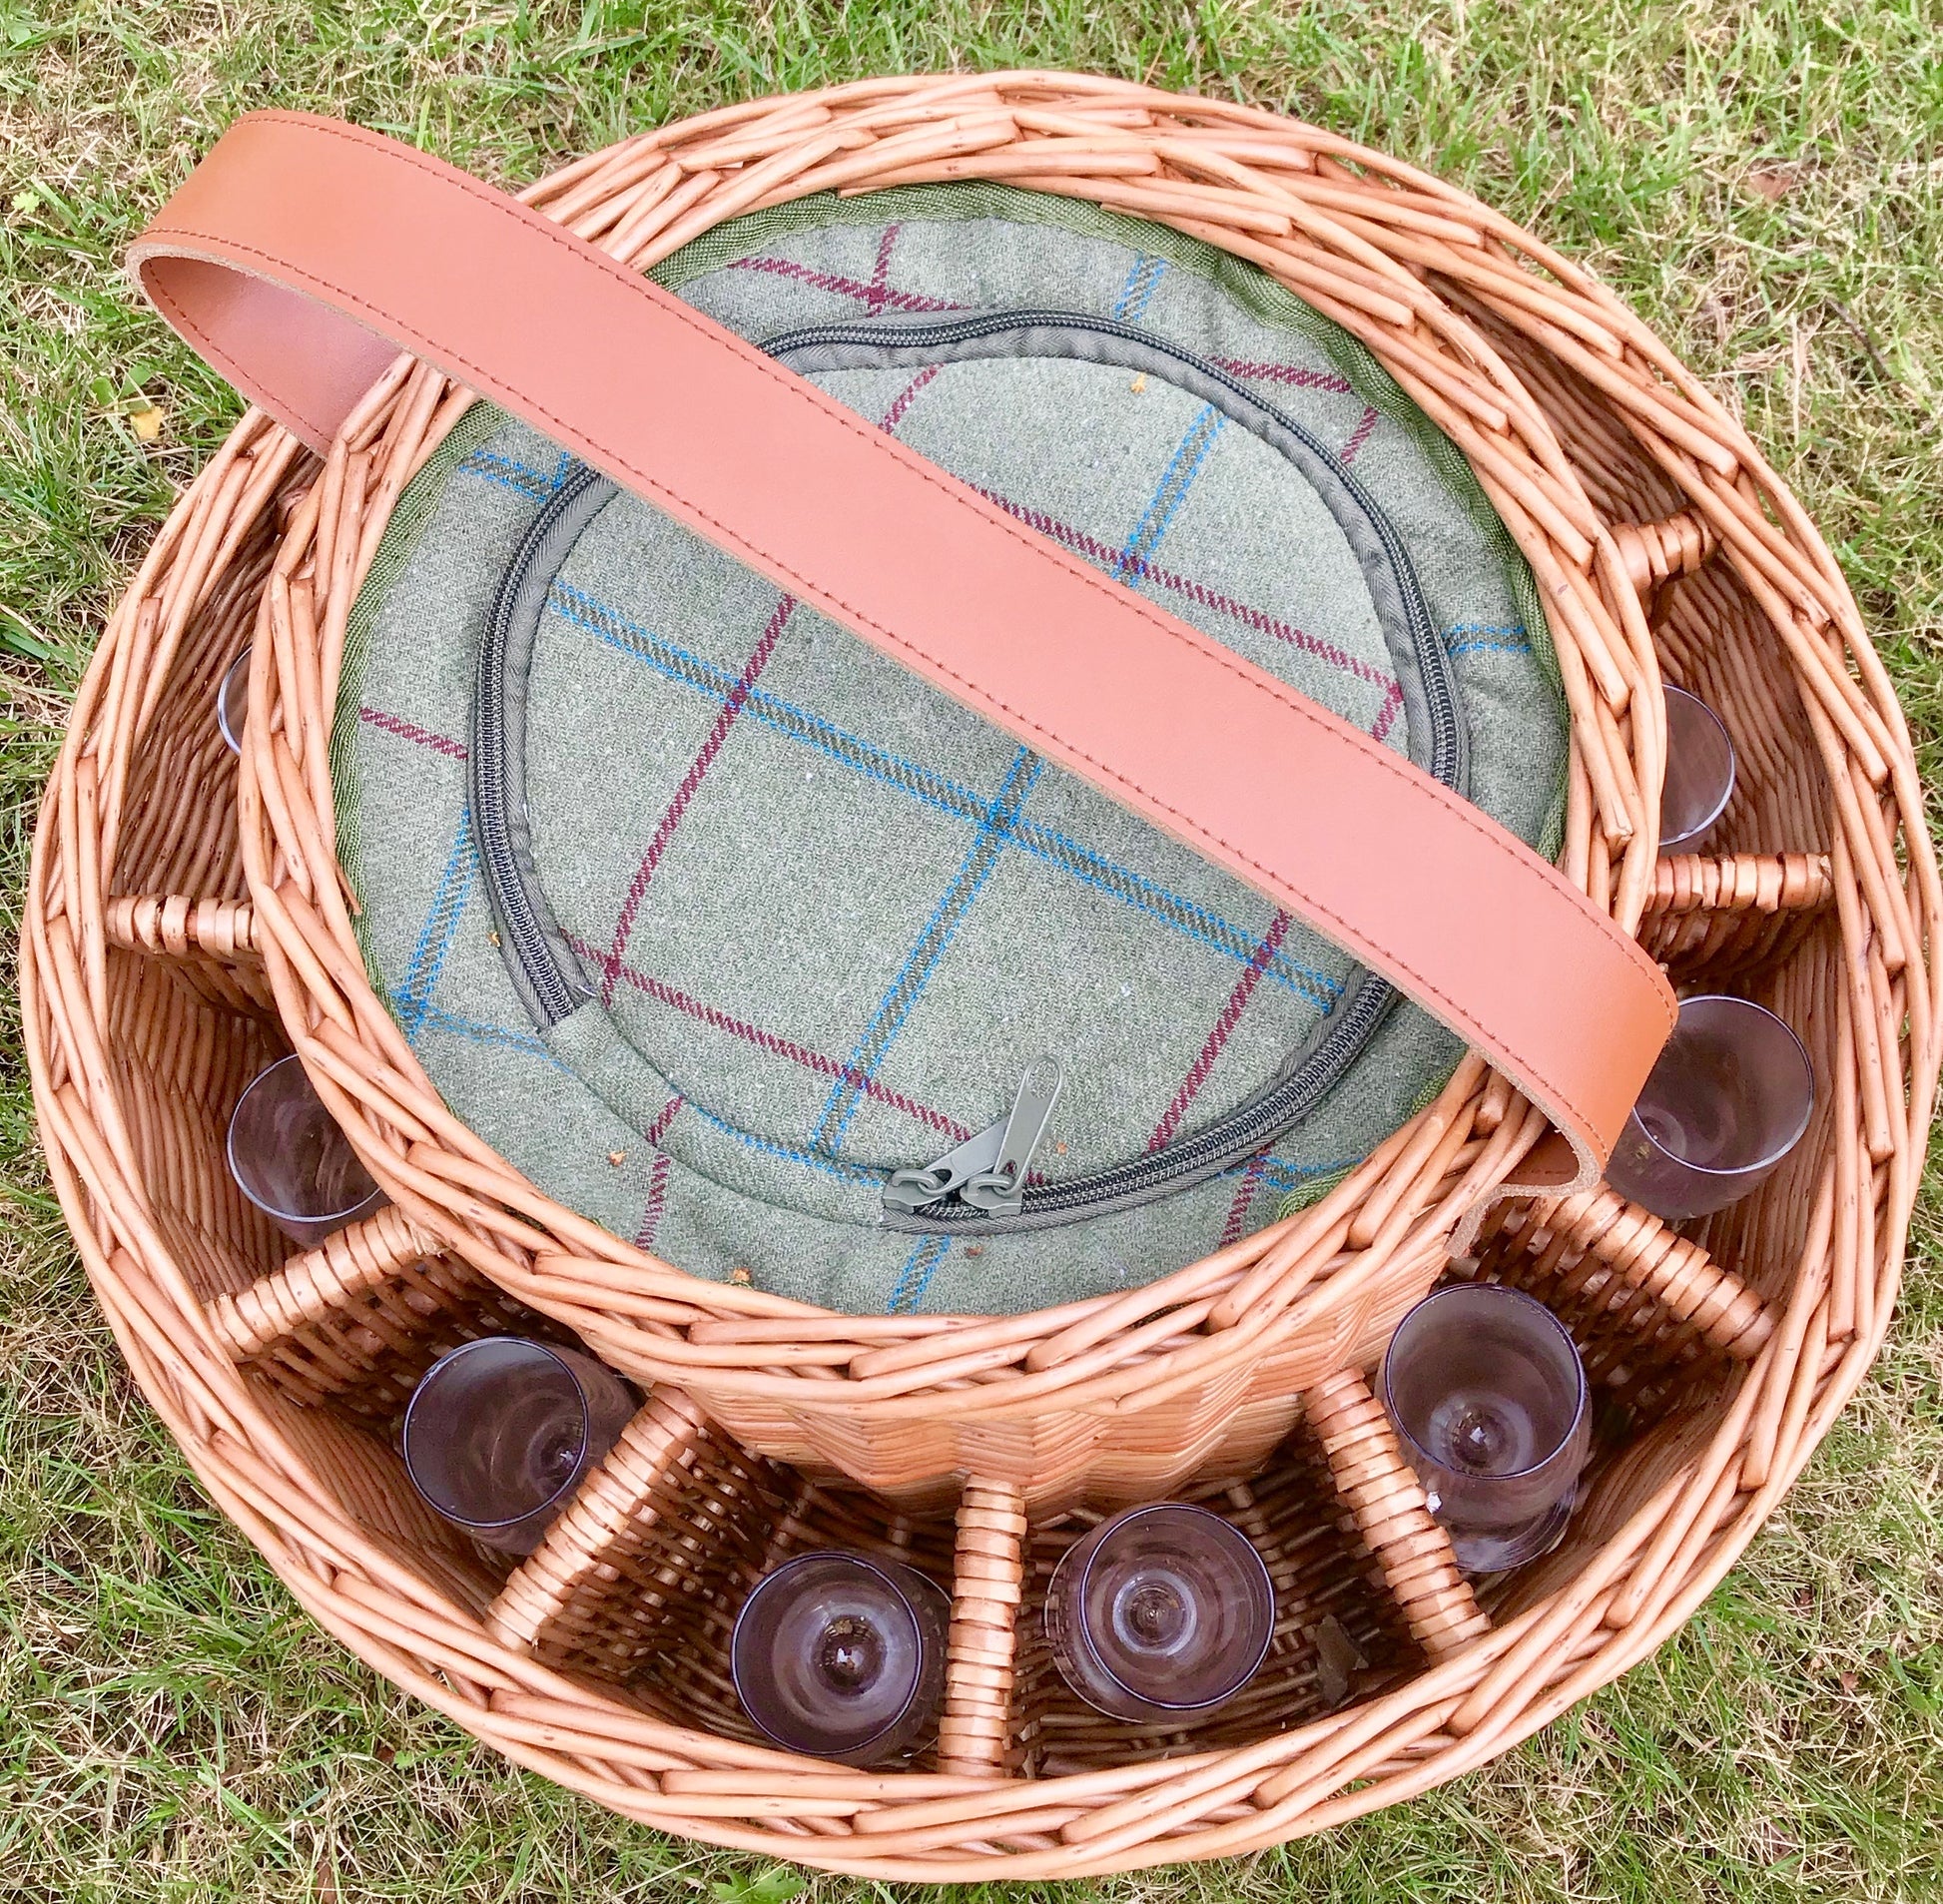 leather trimmed garden party basket